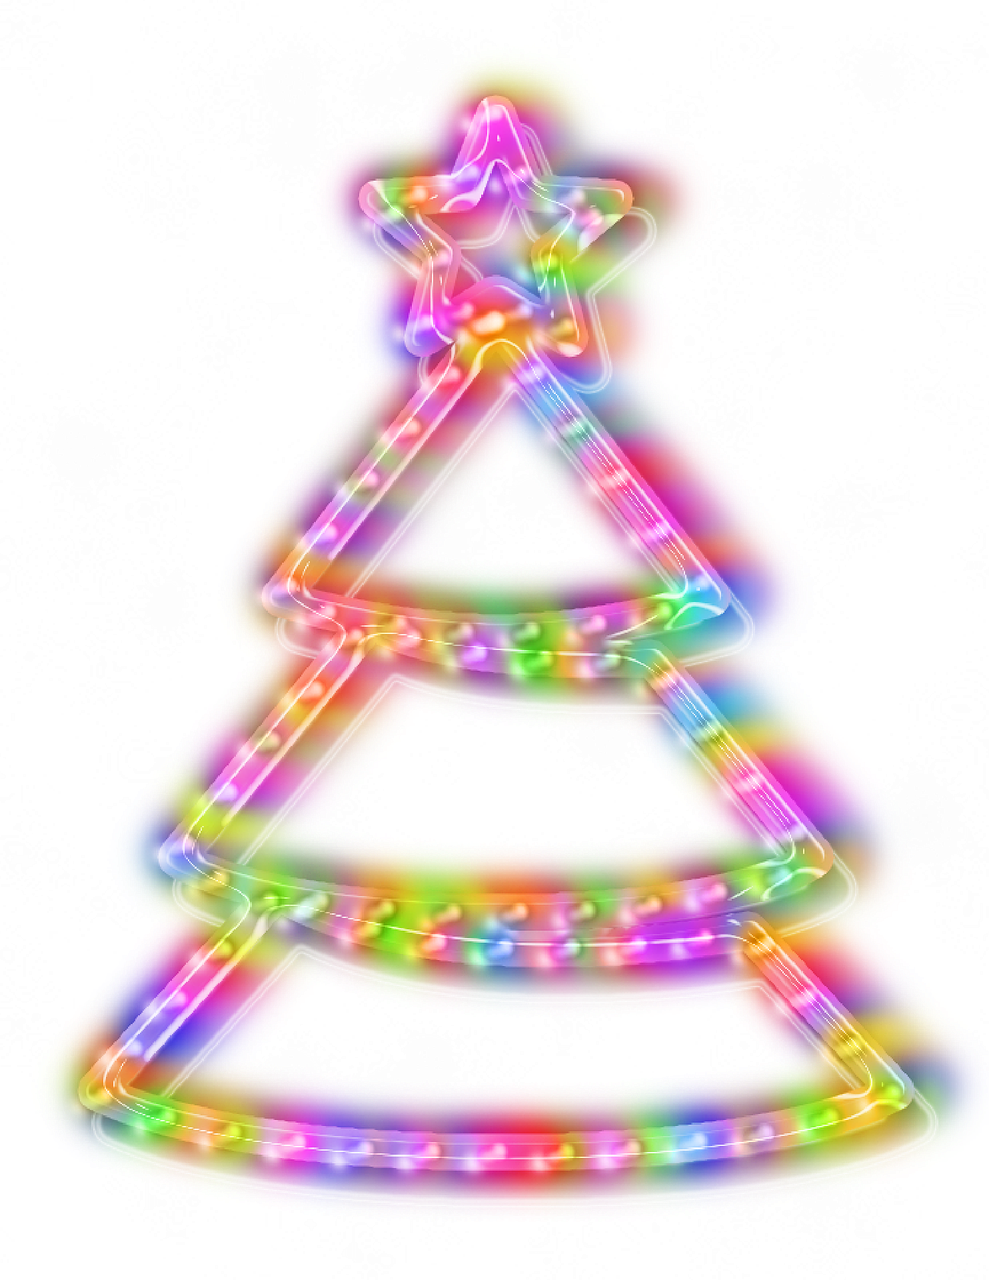 a christmas tree with a star on top of it, a raytraced image, inspired by Peter Alexander Hay, tumblr, generative art, eiffel tower, portrait of a lisa frank, phone photo, paris 2010